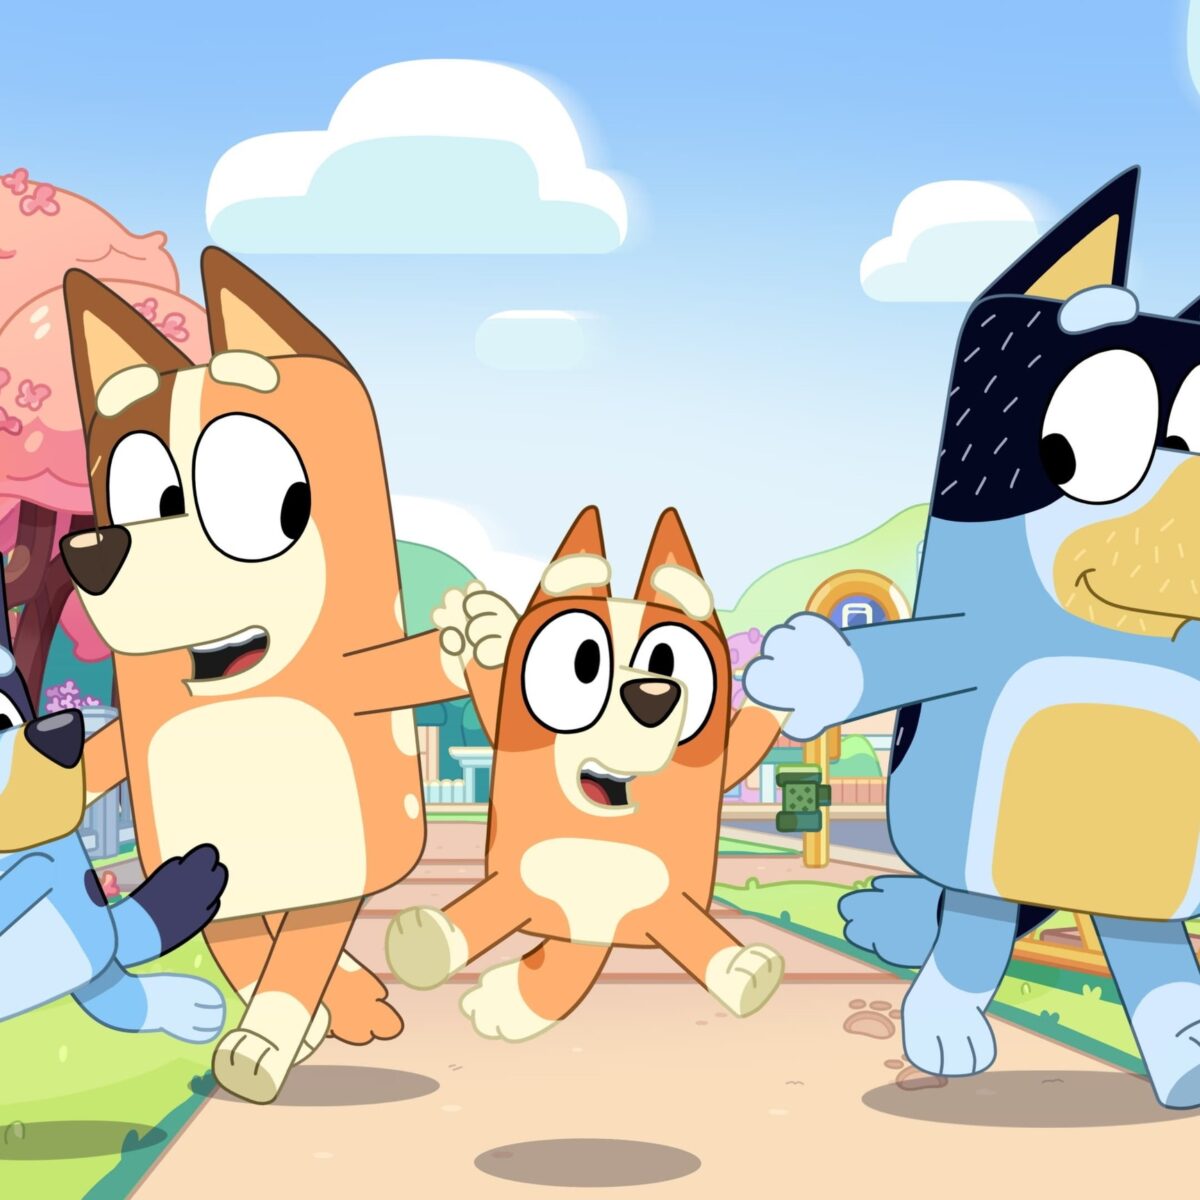 Bluey: A Family Favorite Continues to Charm Audiences